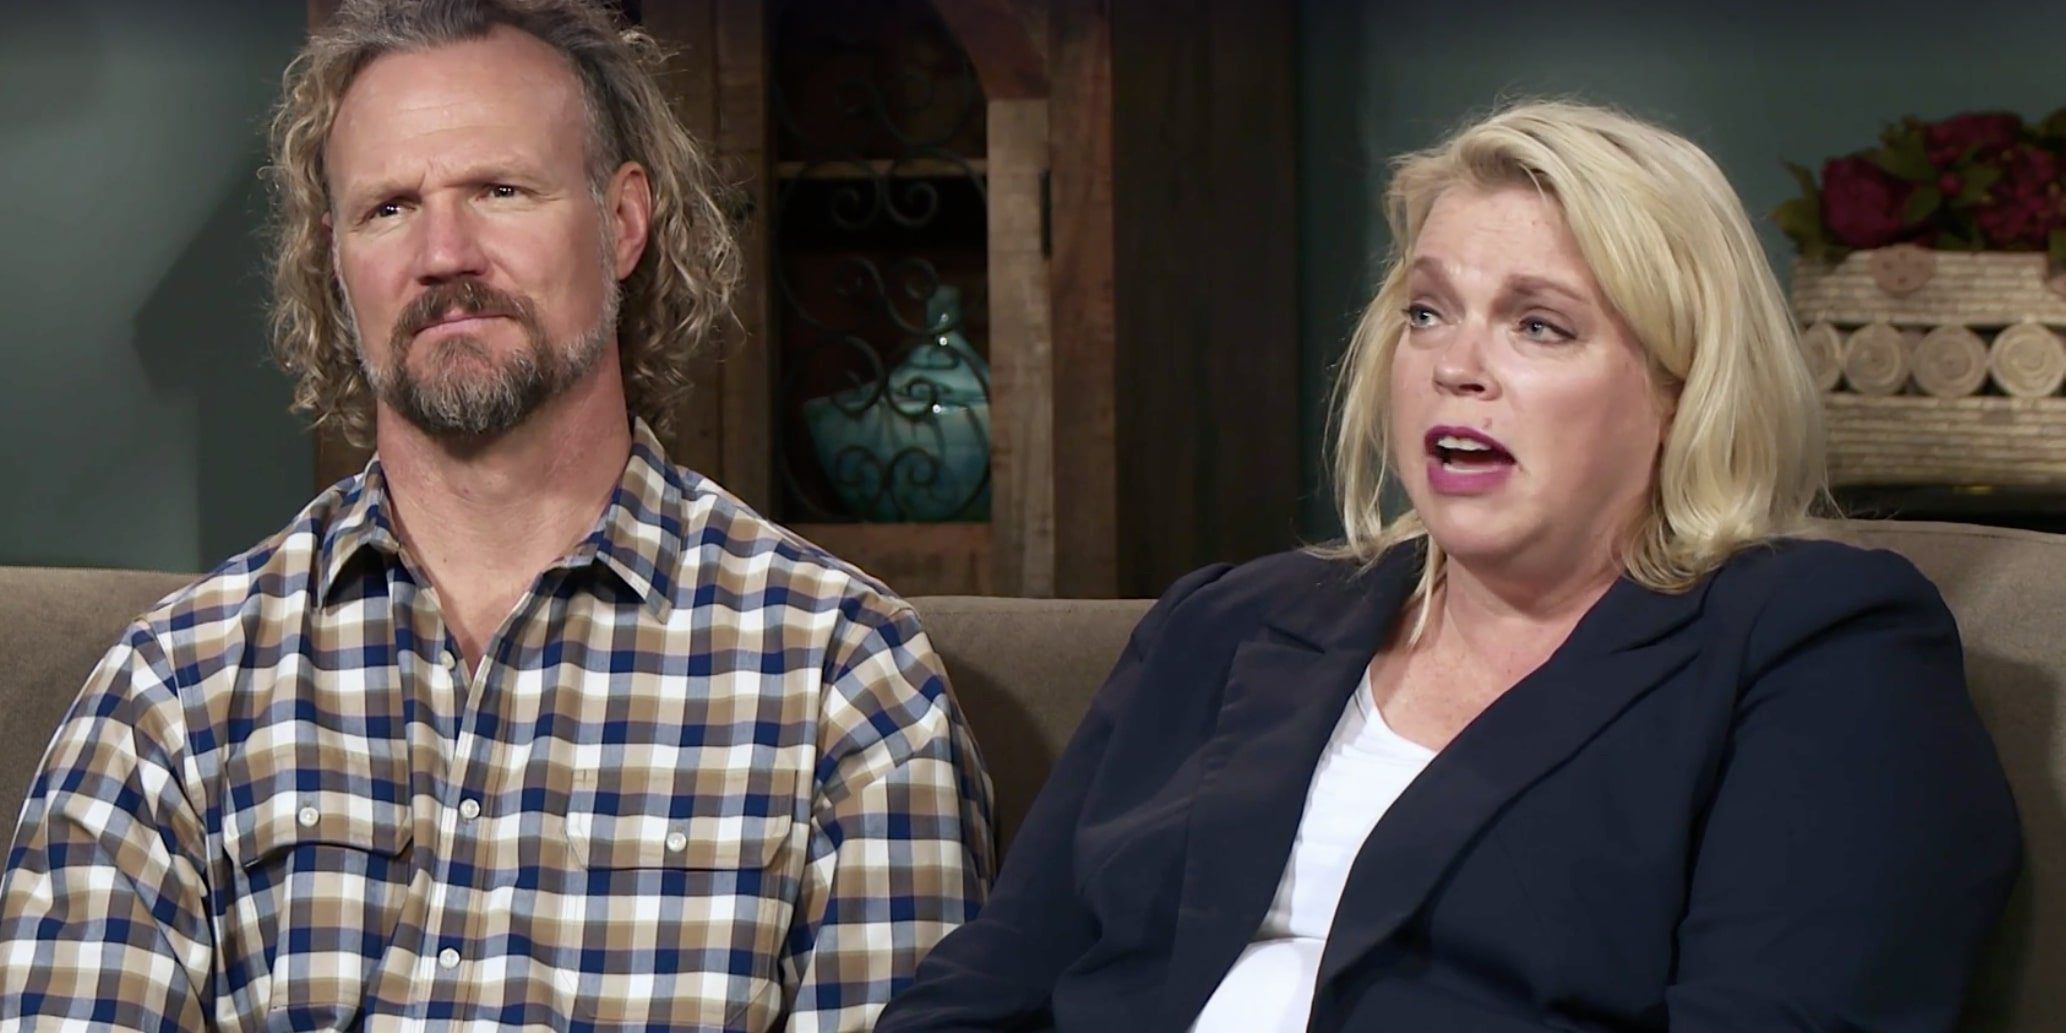 Sister Wives star Janelle Brown's Dogs Are No Match For RV Life Creatures